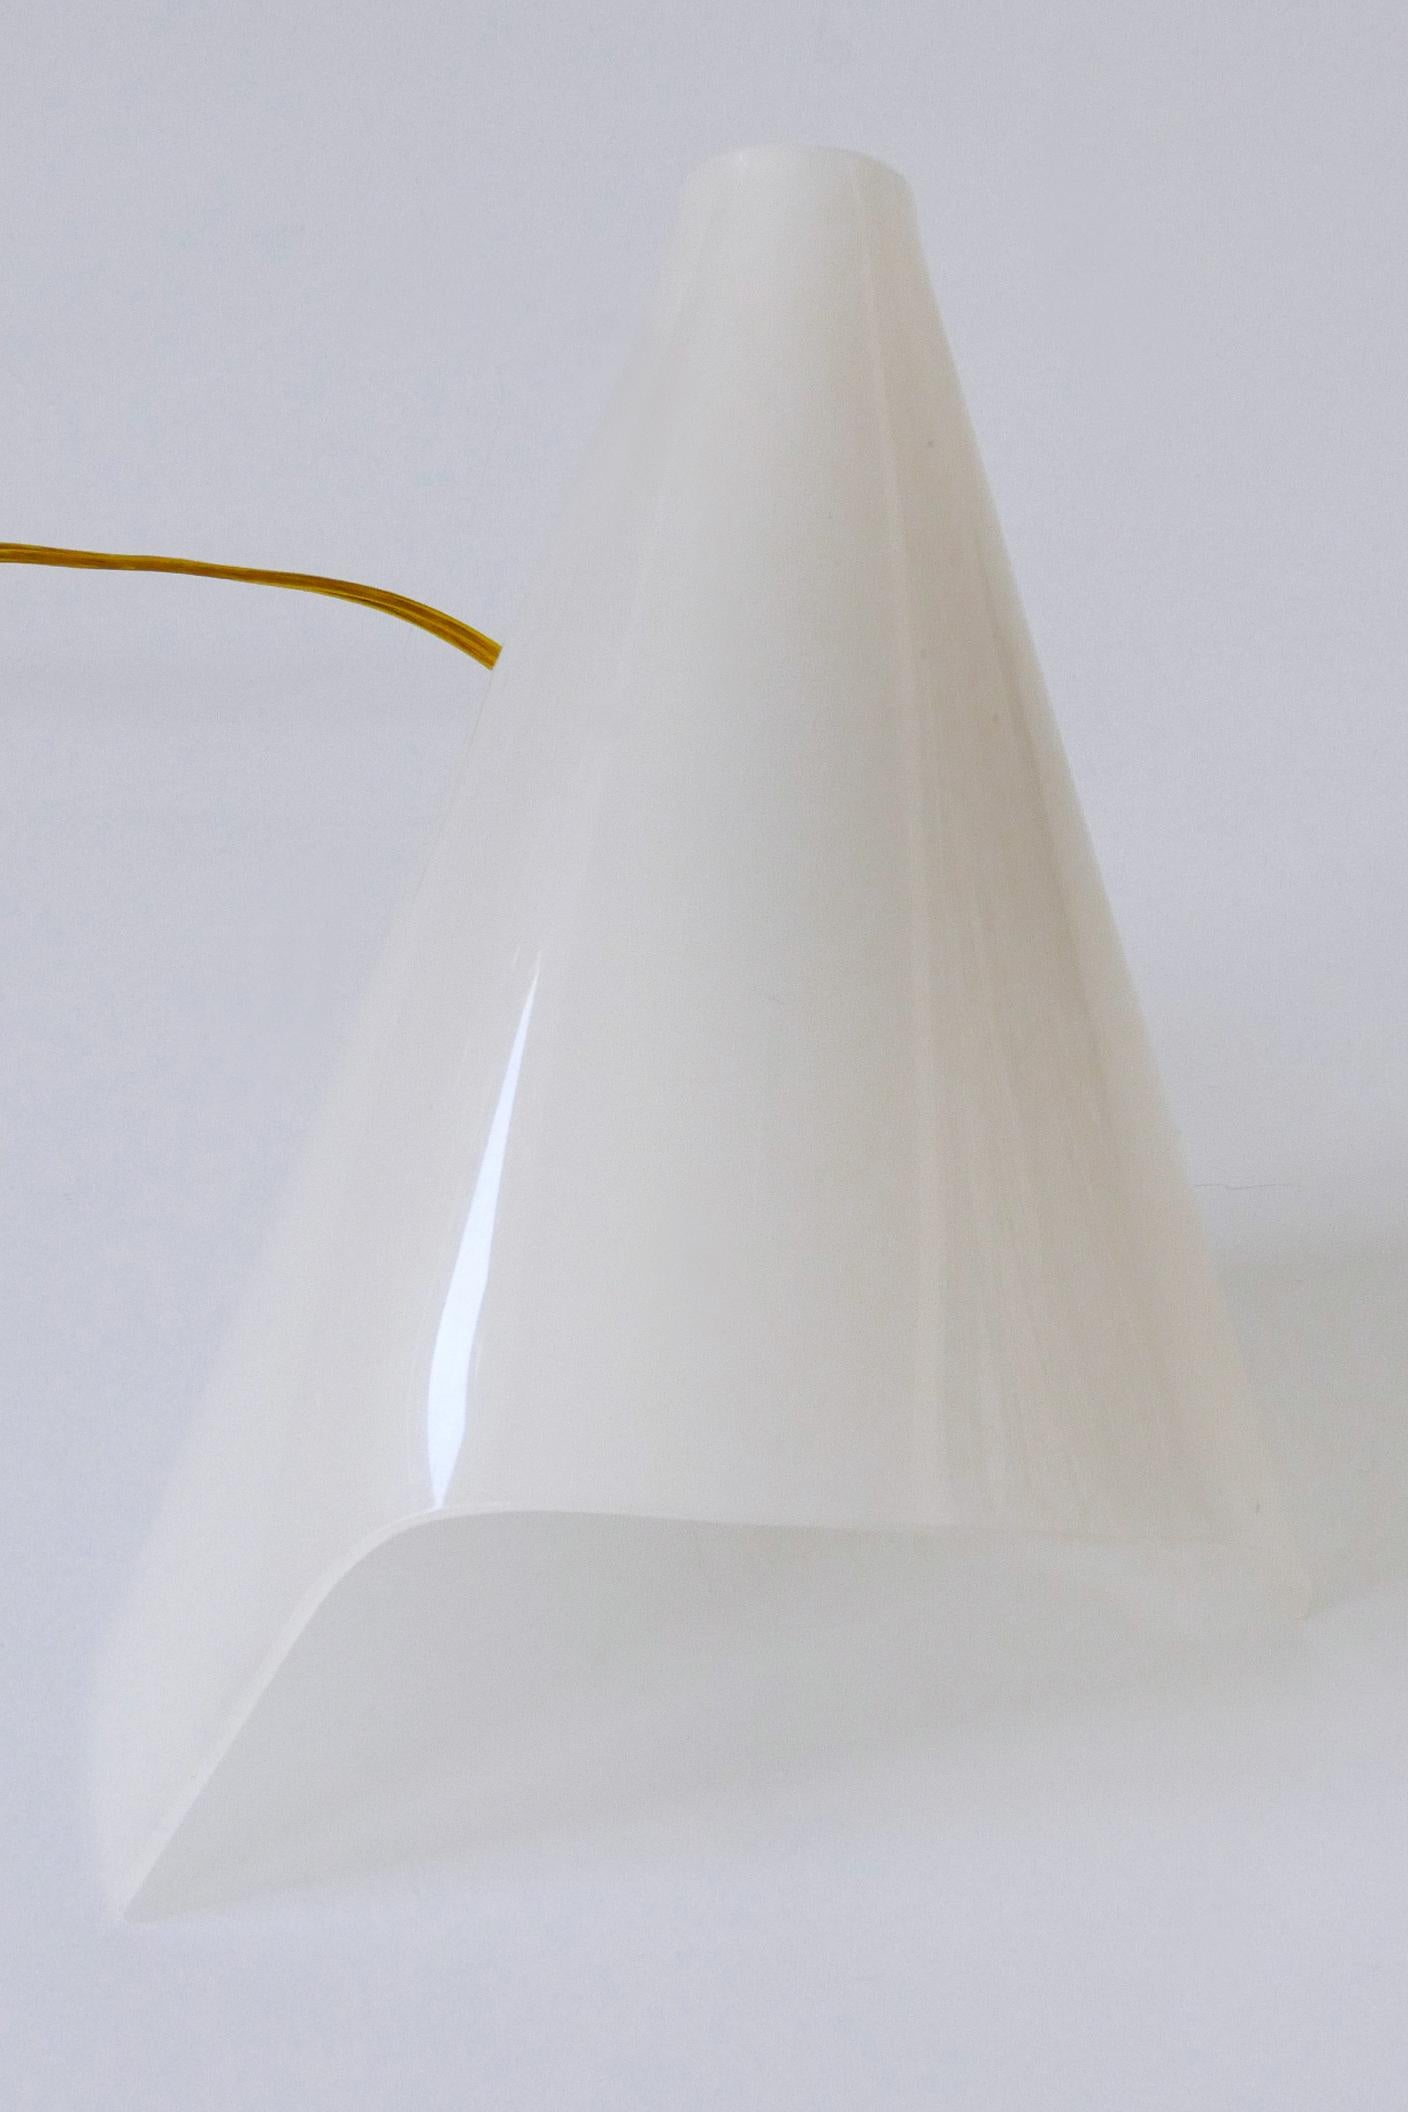 Extremely Rare and Lovely Mid-Century Modern Lucite Table Lamp Sweden 1960s For Sale 4